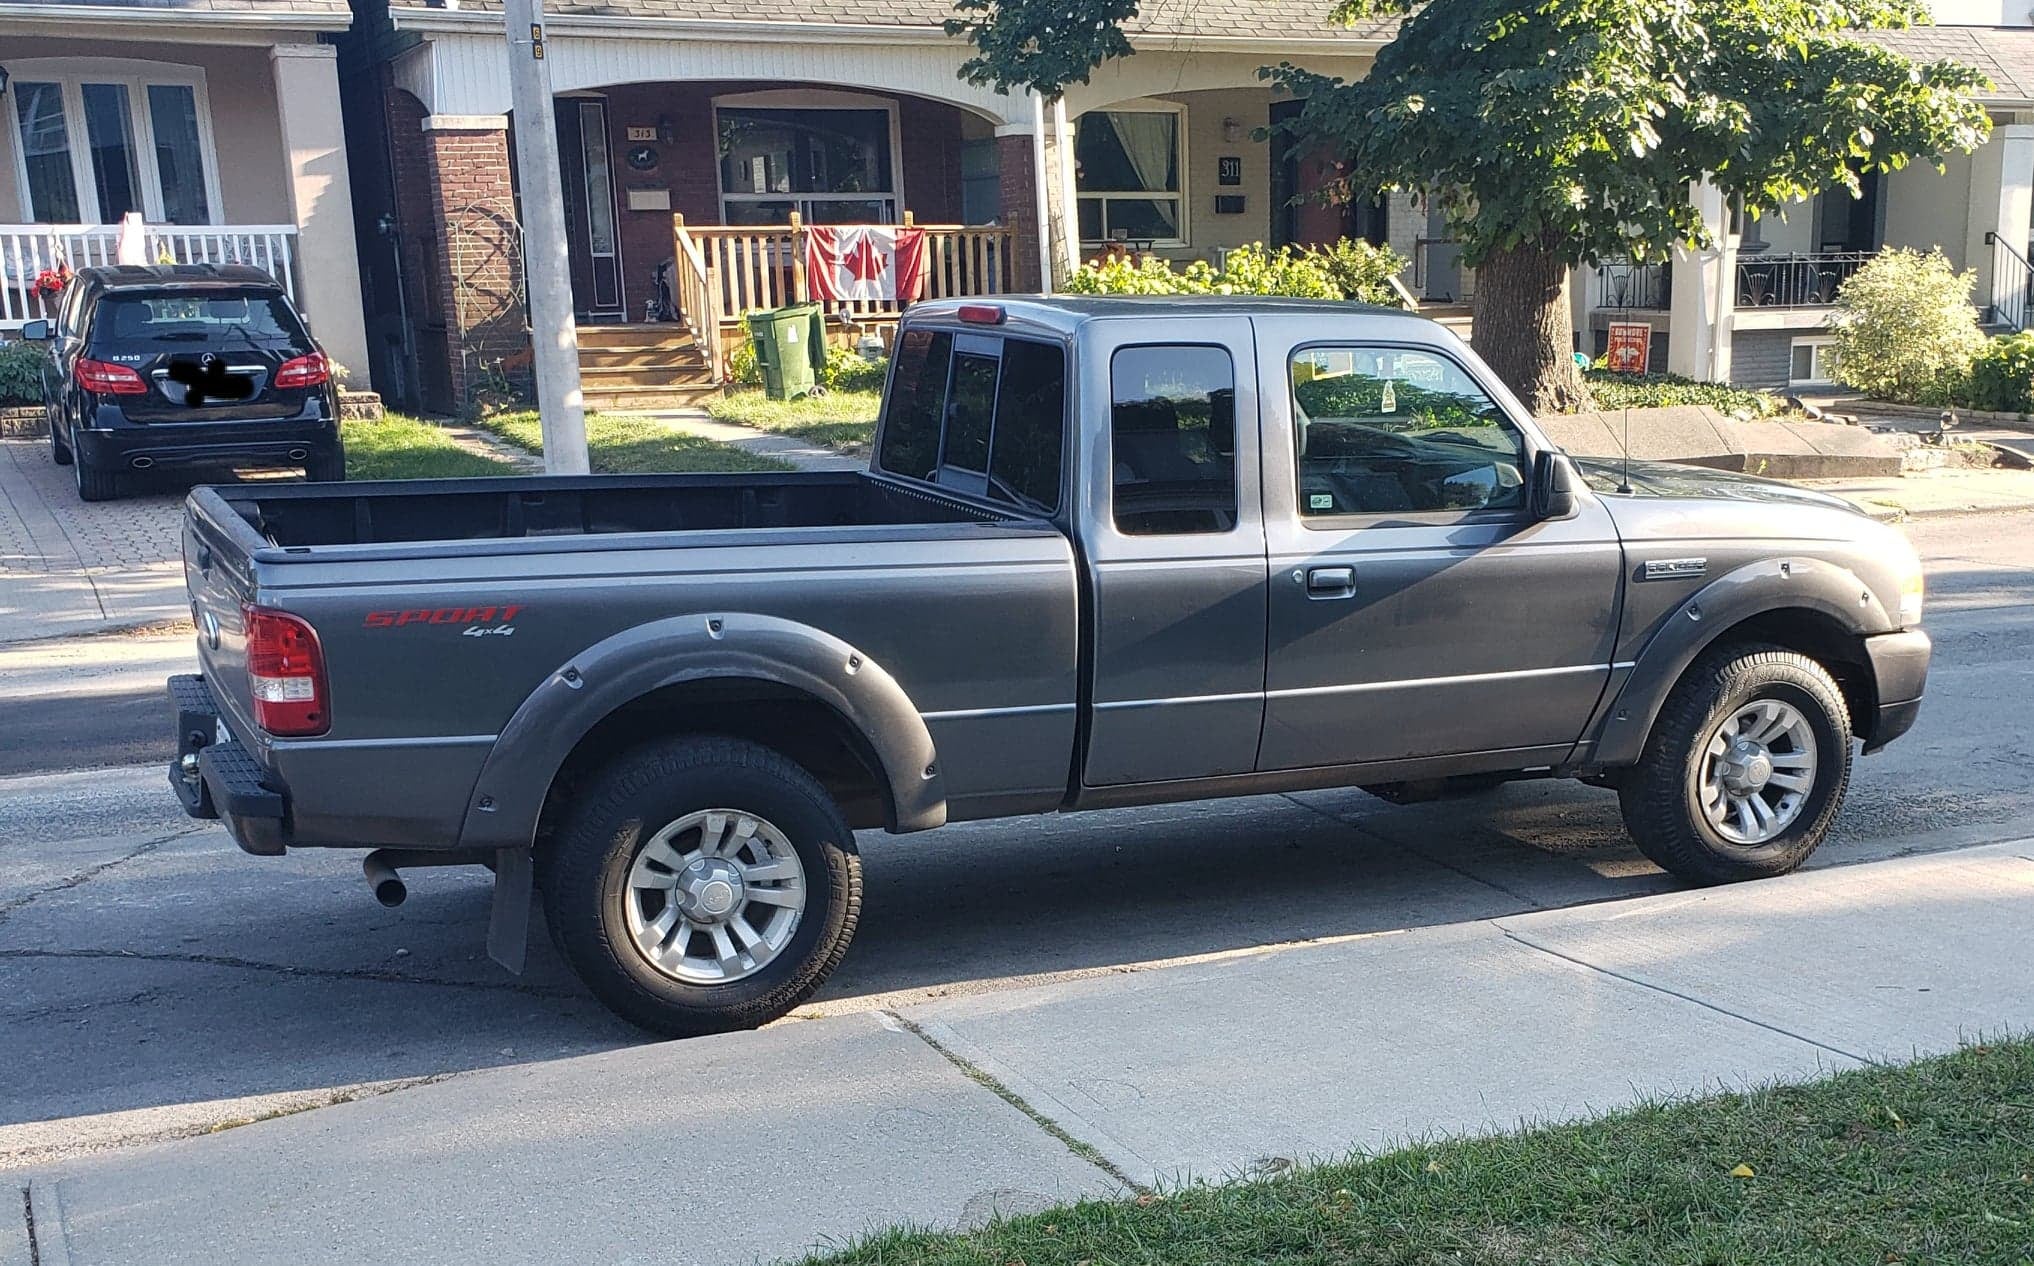 My New (to me) Ranger! 2007 4.0L 4x4 Sport, 250,000km for $4000 CAD. How  did I do? : r/fordranger